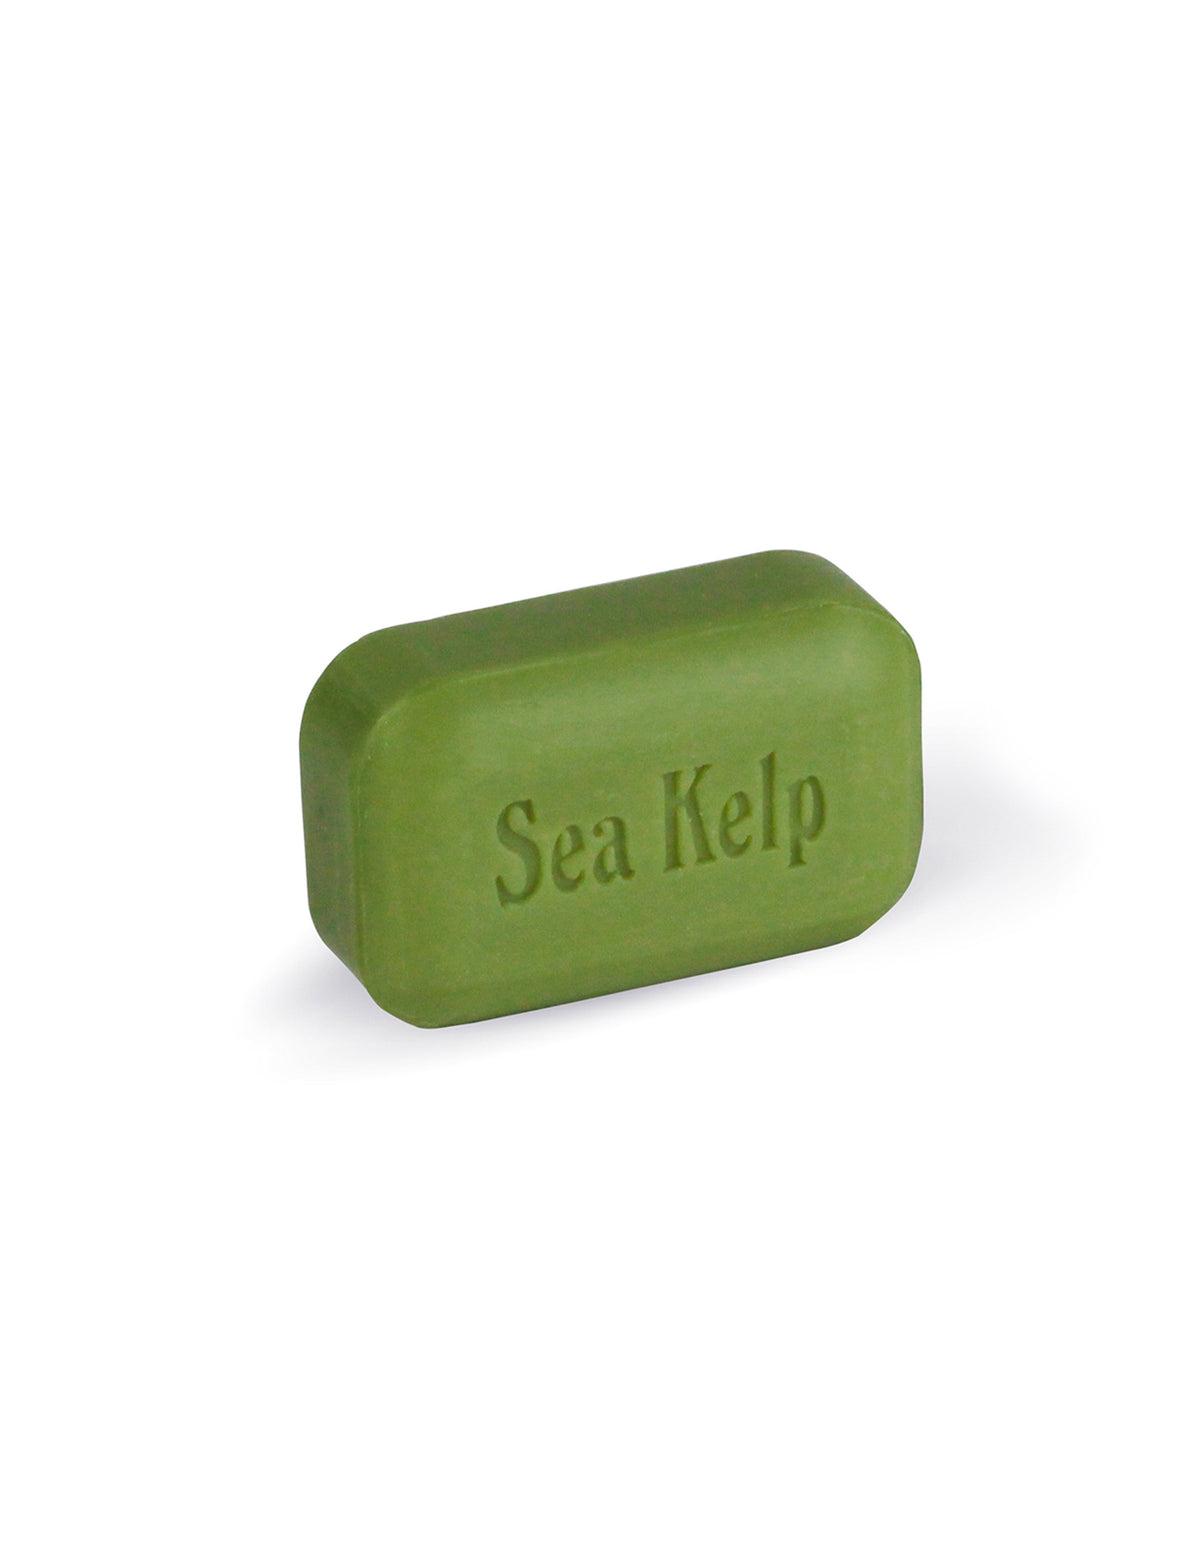 Sea Kelp - ProCare Outlet by The Soap Works